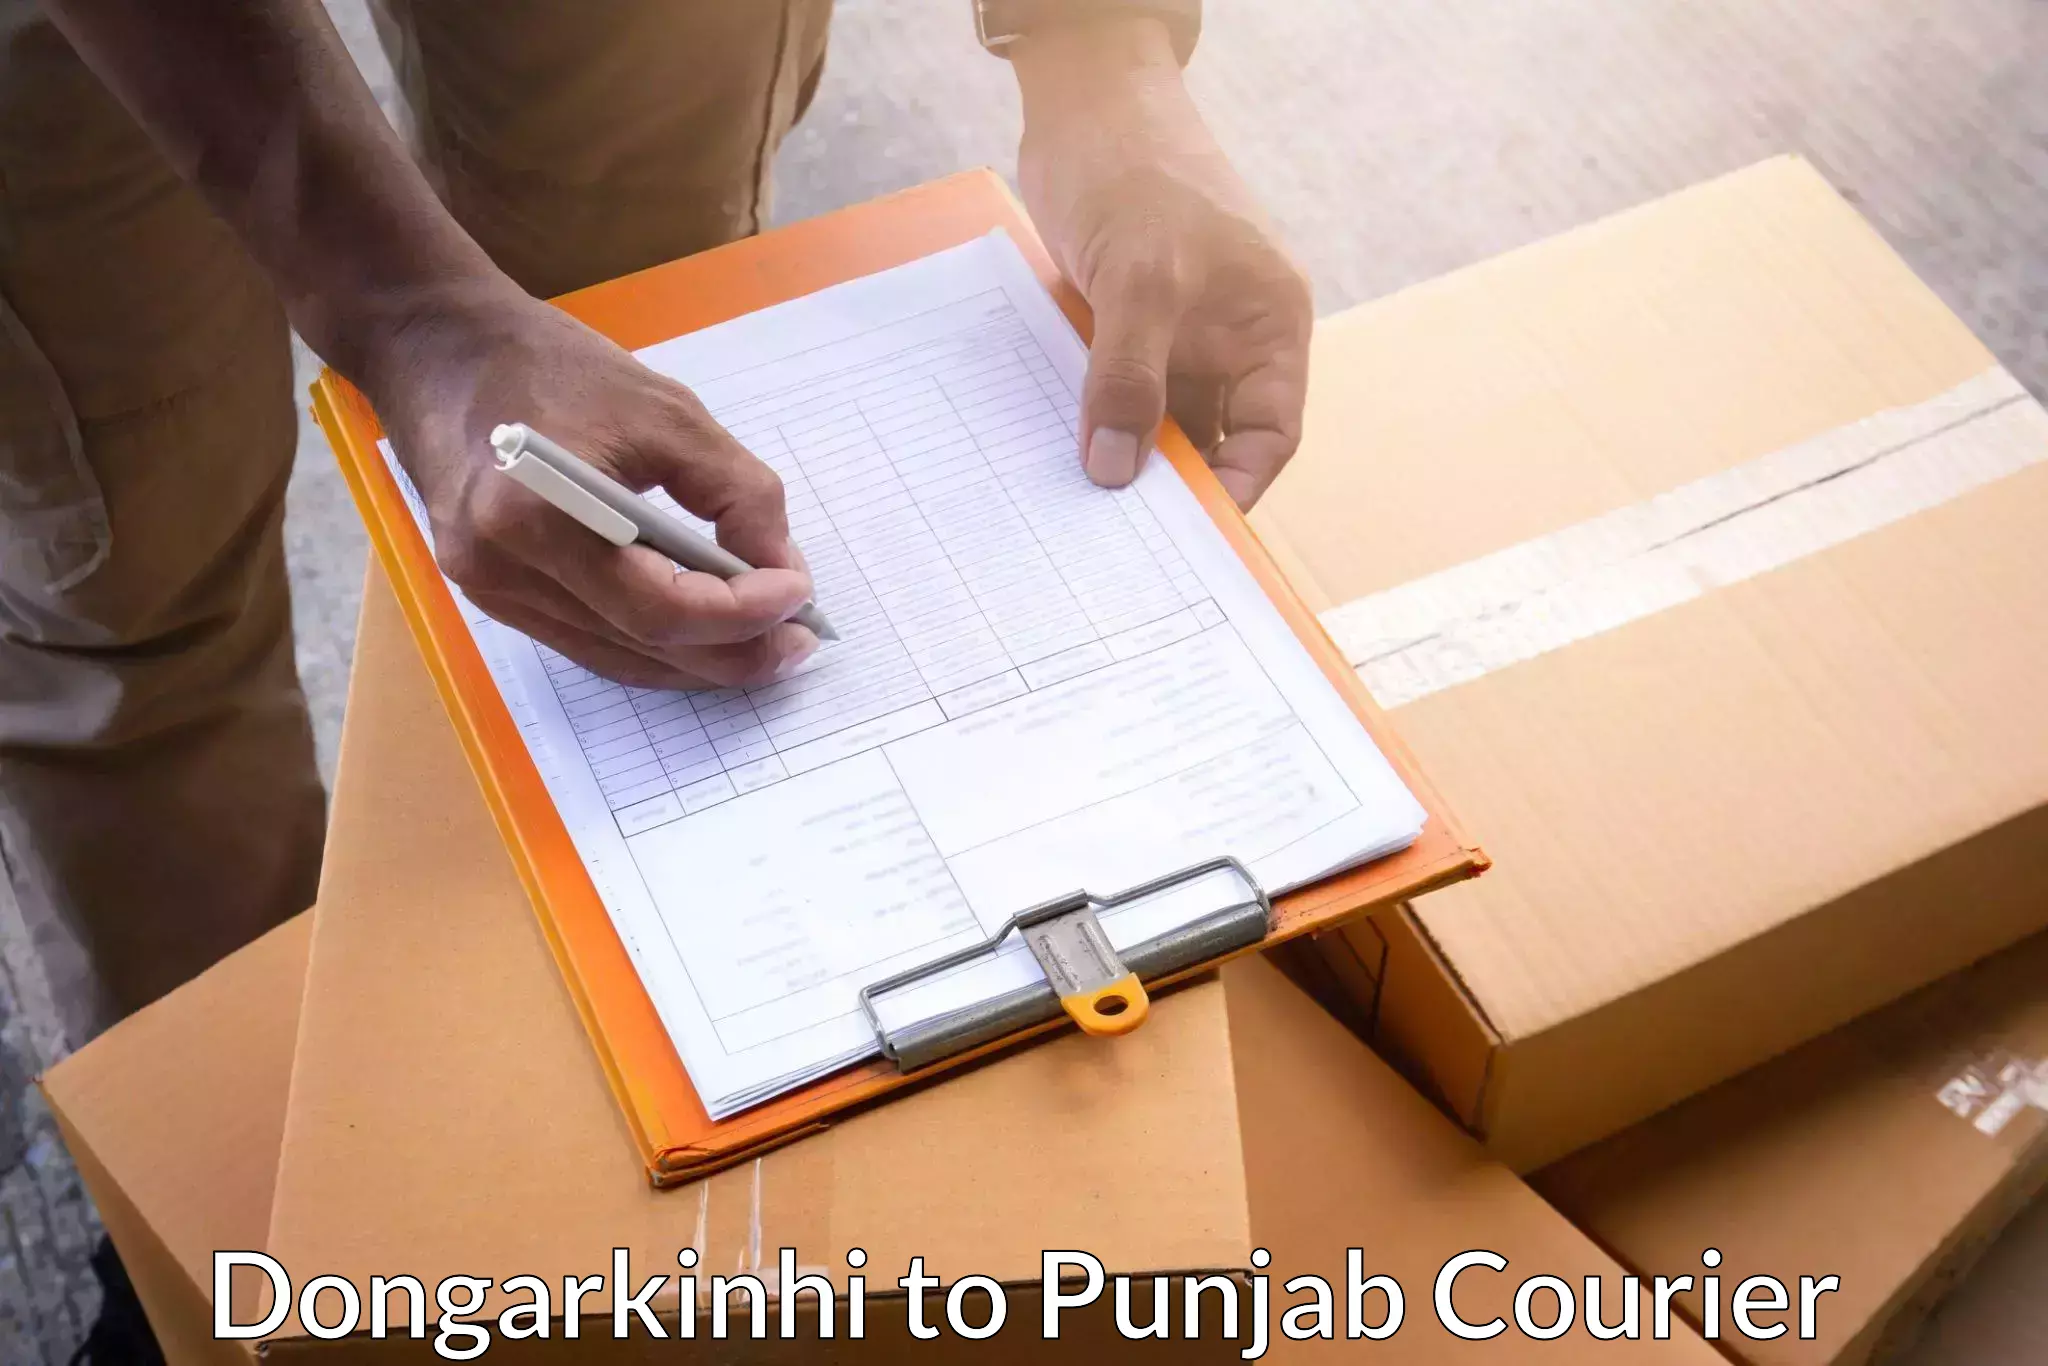 On-call courier service Dongarkinhi to IIT Ropar